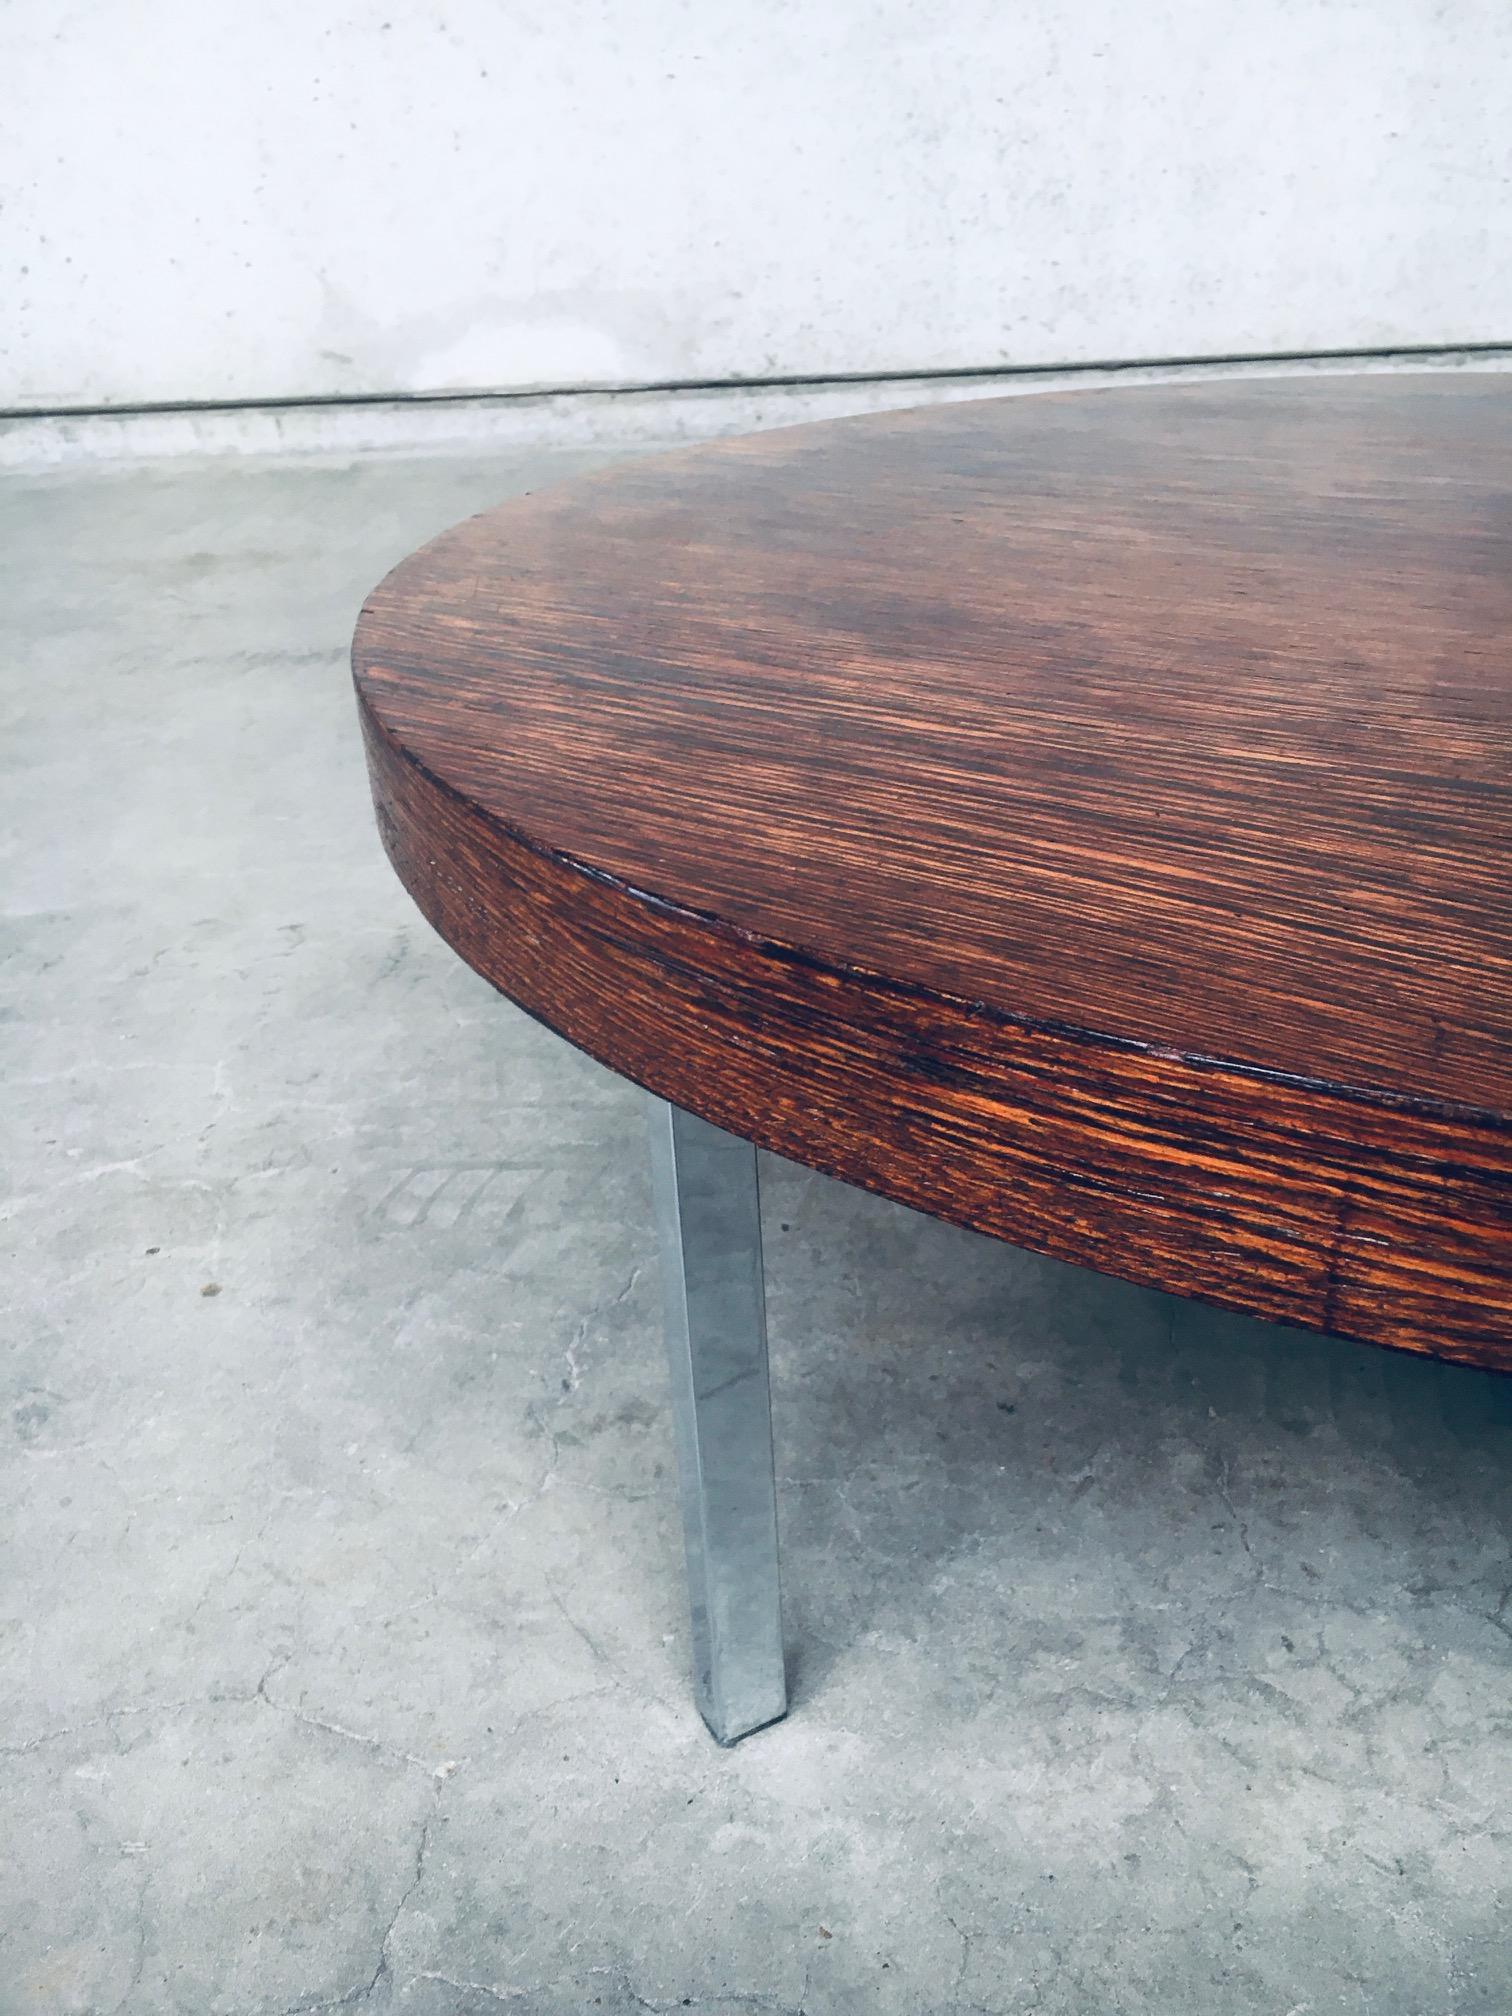 Midcentury Modern Dutch Design Tripod Coffee Table, Netherlands 1960's For Sale 5